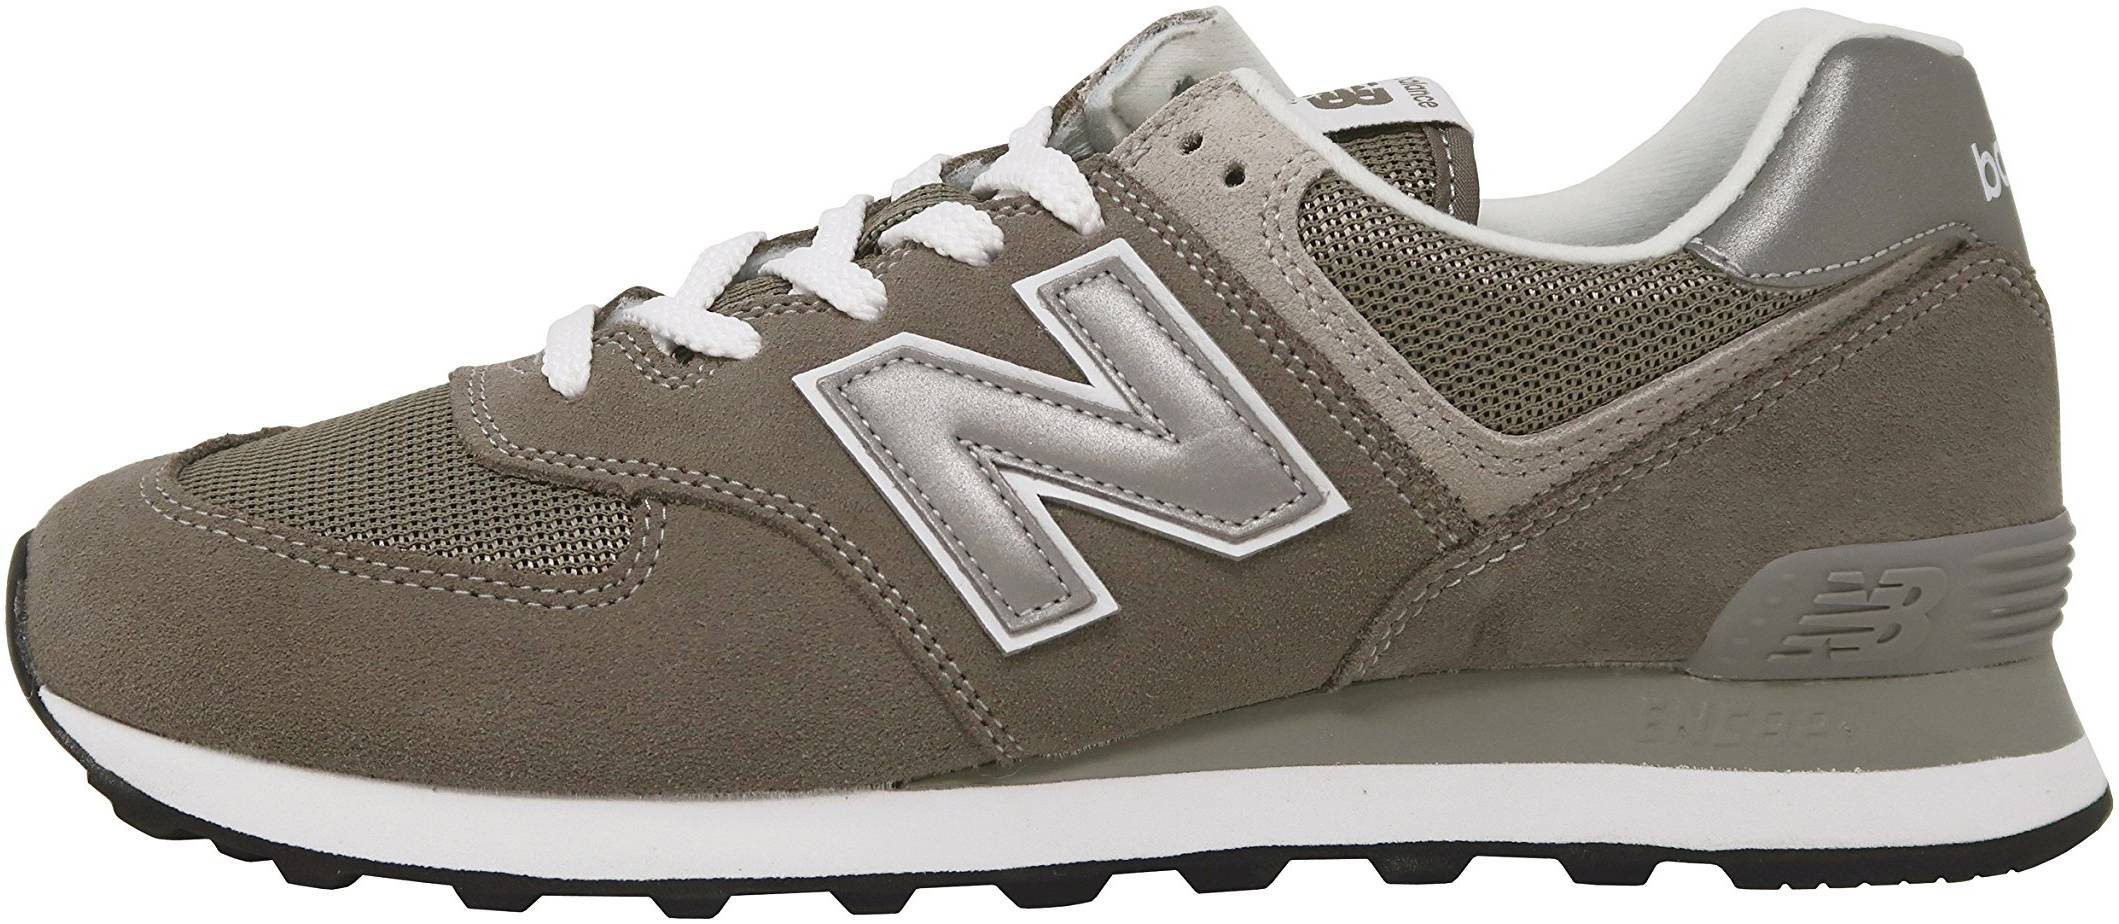 New Balance 574 sneakers in 20 colors (only £38) | RunRepeat